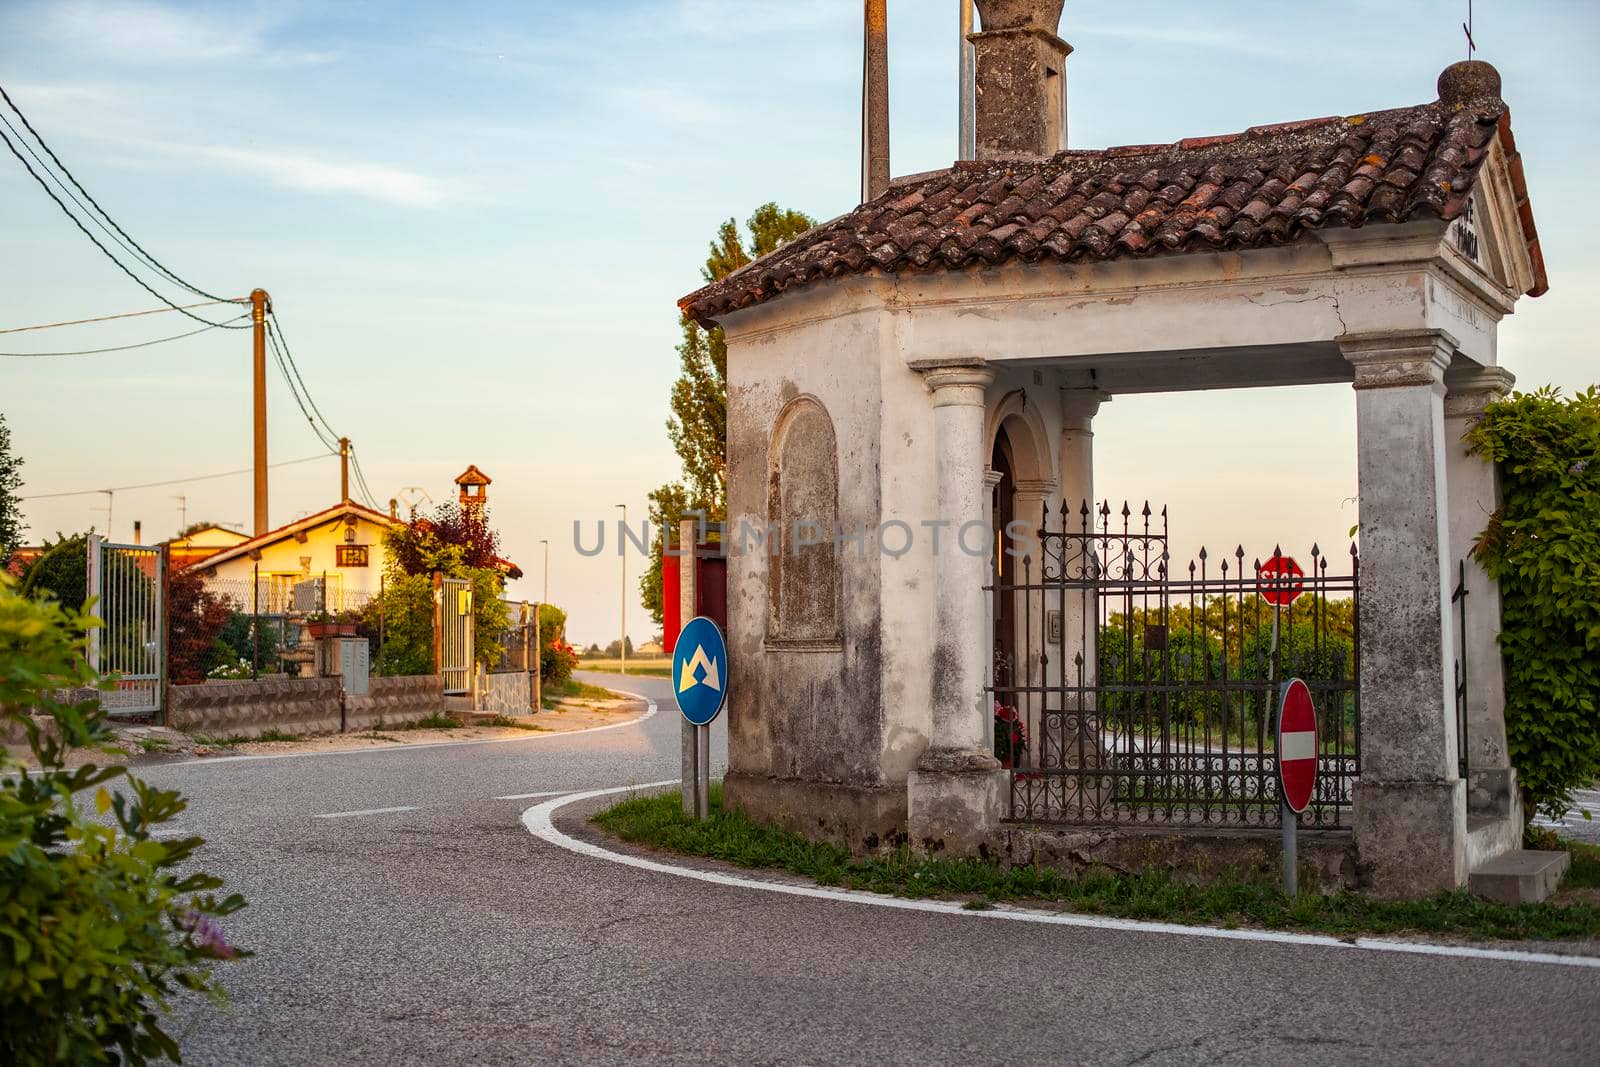 Road junction of a country town by pippocarlot